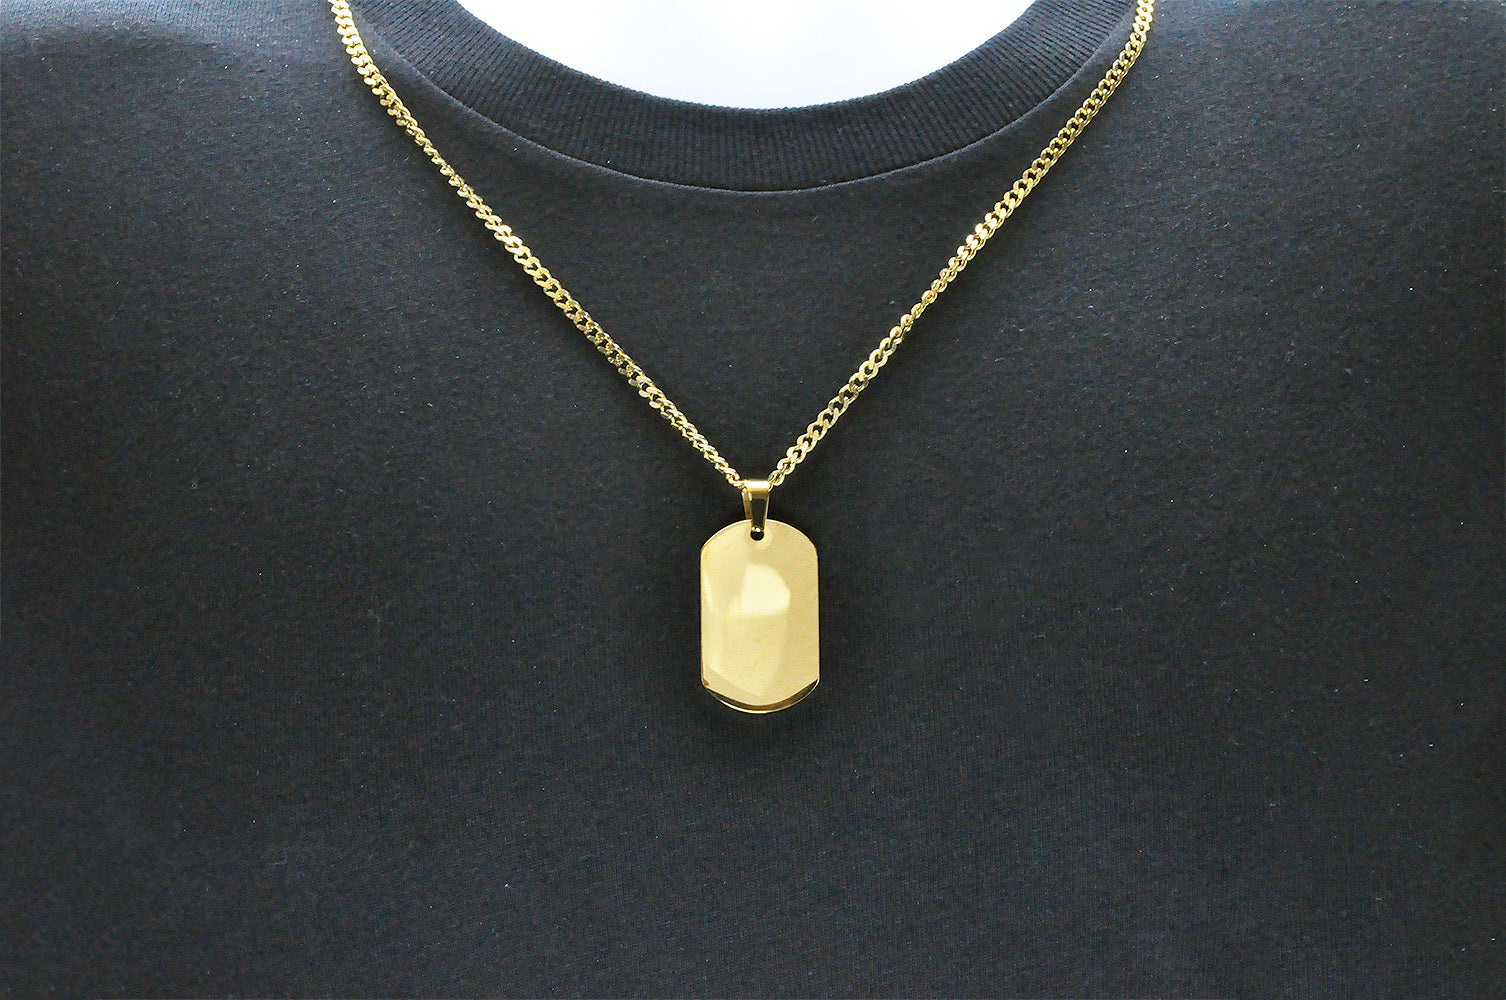 Mens Dog Tag Necklace in 14k Yellow Gold (24 in)